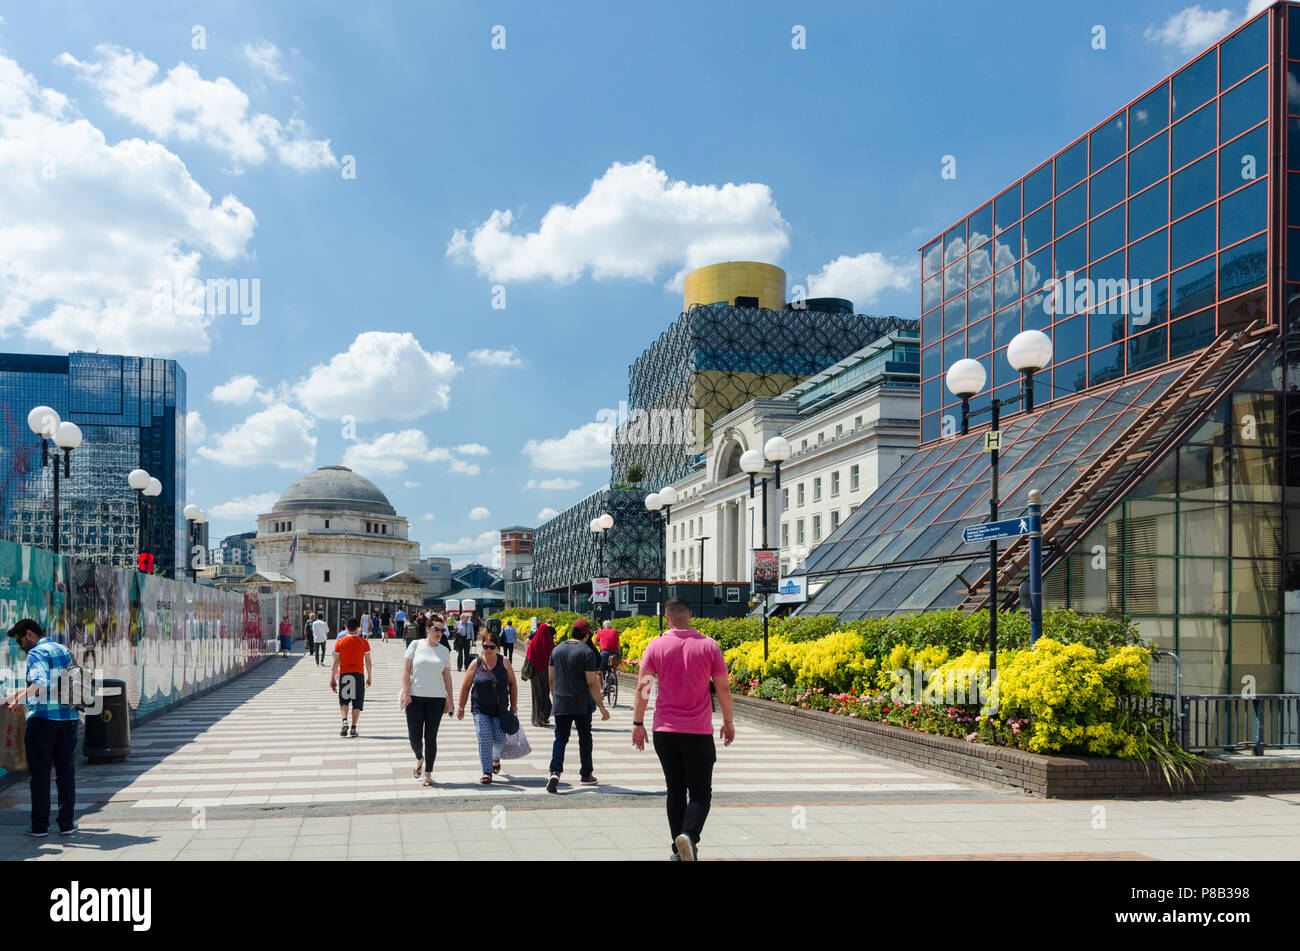 Looking from Paradise Circus towards Centenary Square and Baskerville House, the Hall of Memory and Library of Birmingham Stock Photo